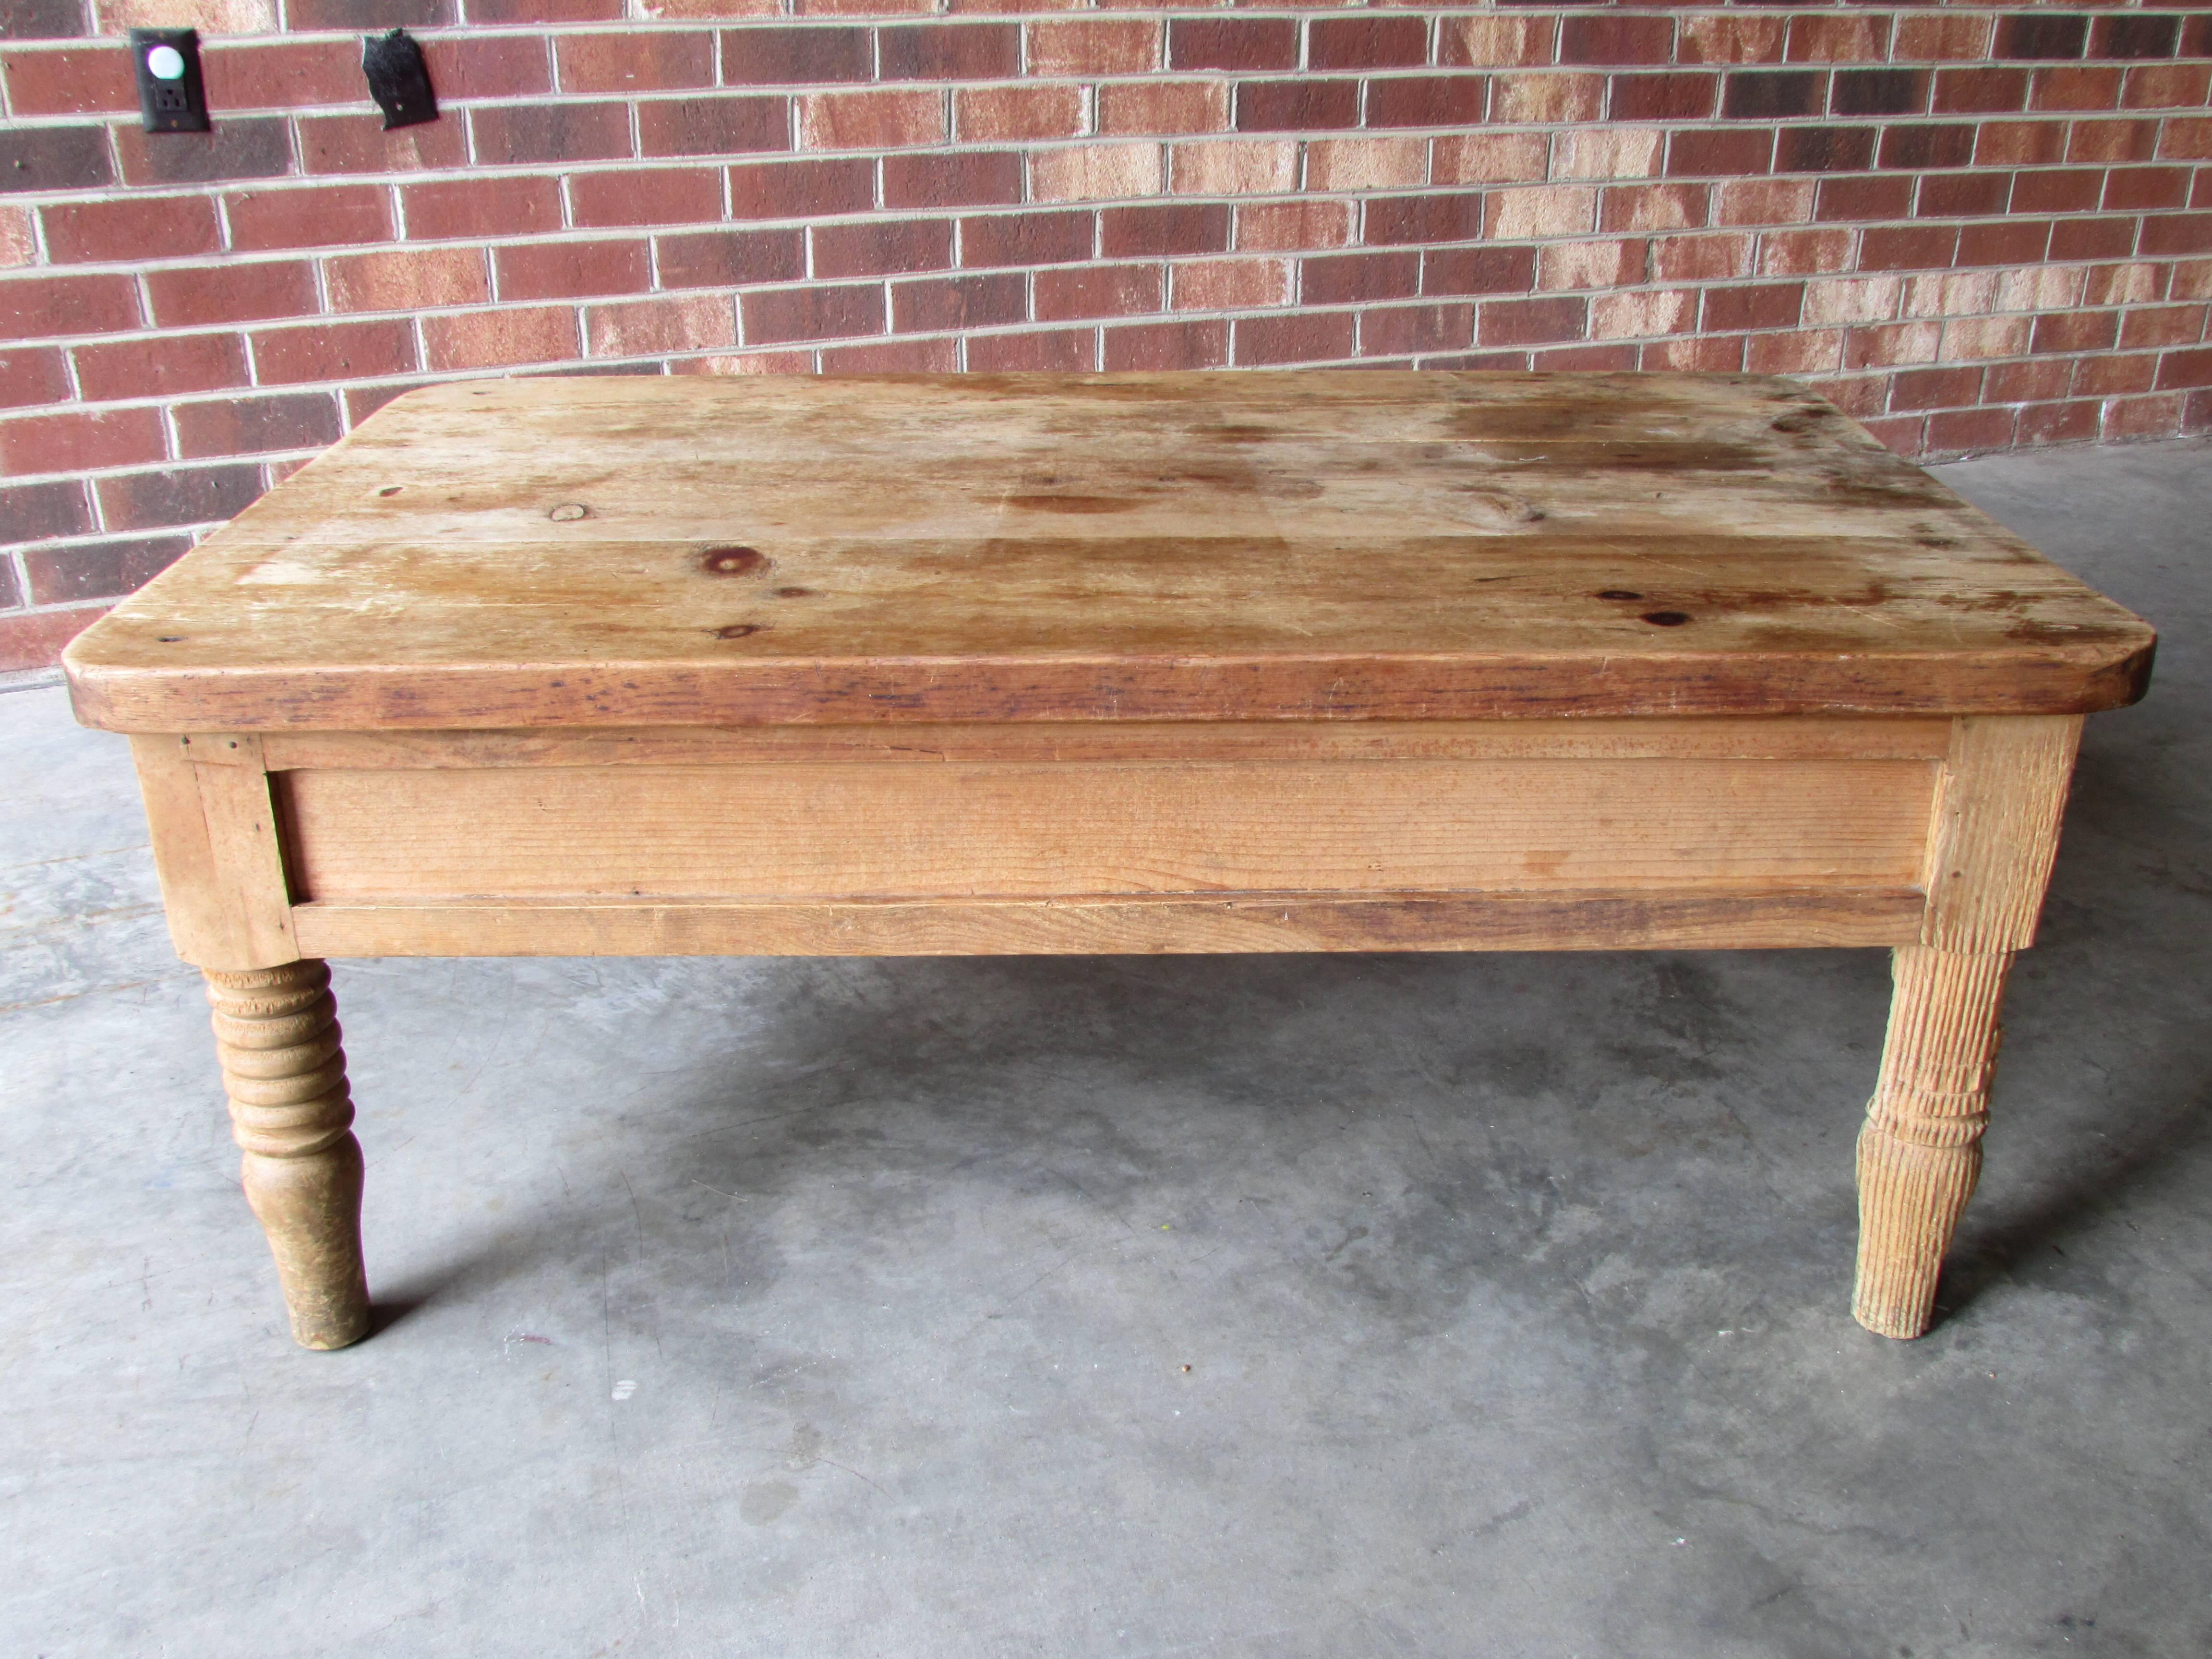 Rustic pine coffee table with a very worn and weathered finish has two drawers on either side with hand-forged iron pull handles.